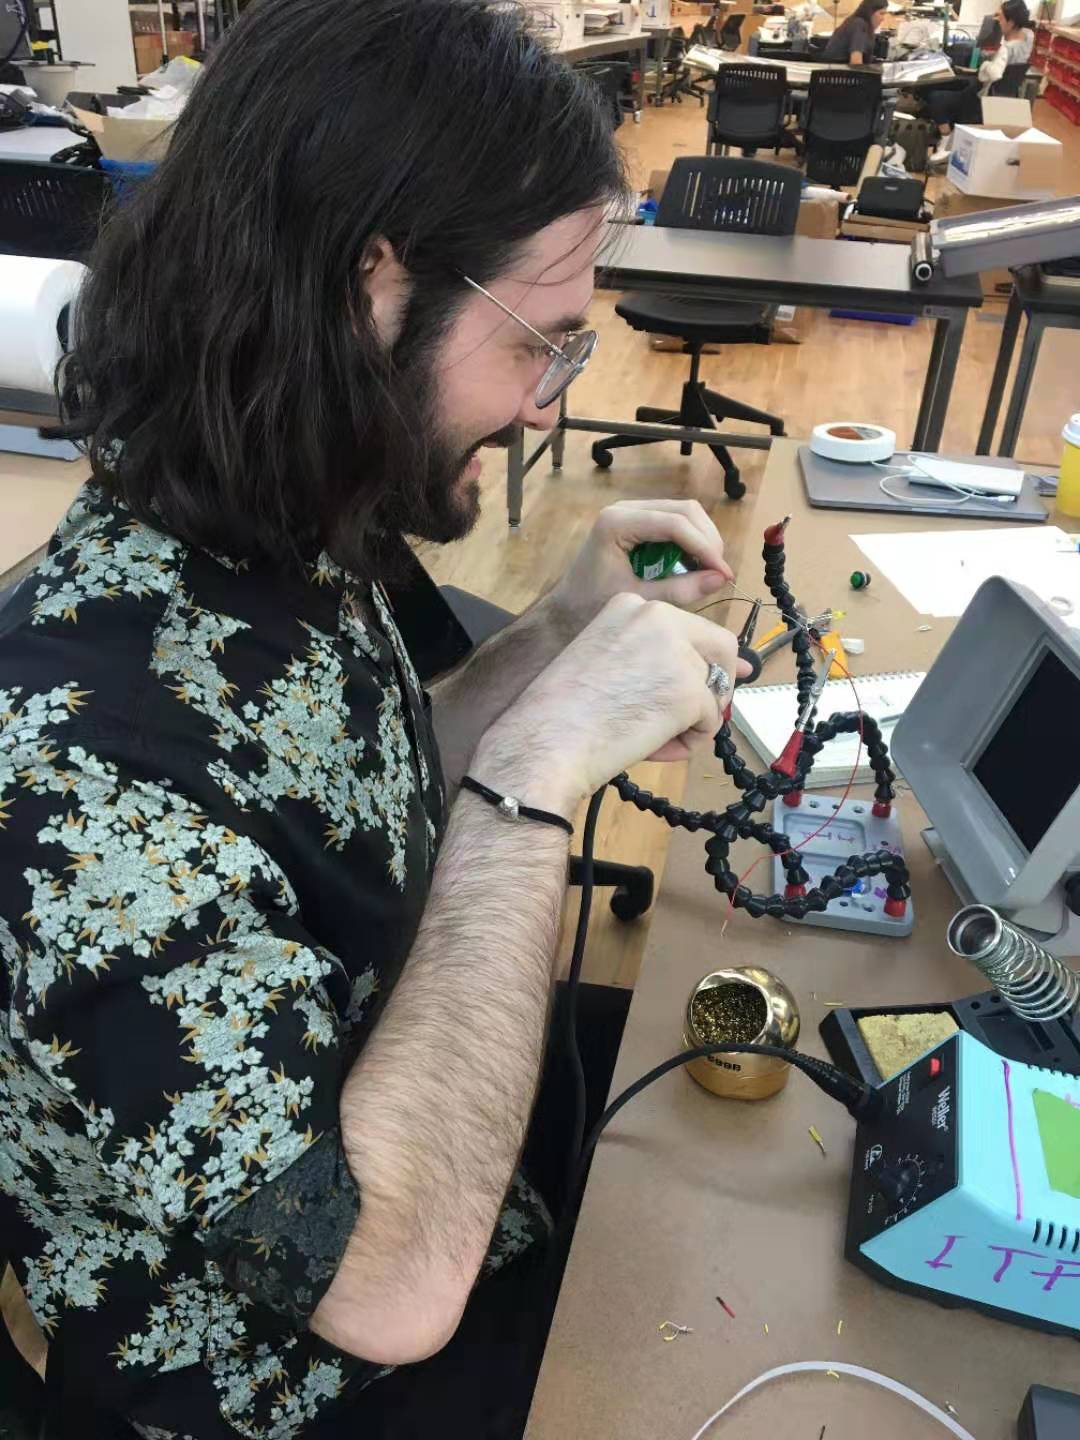 This is me learning to solder, using
      a soldering iron.